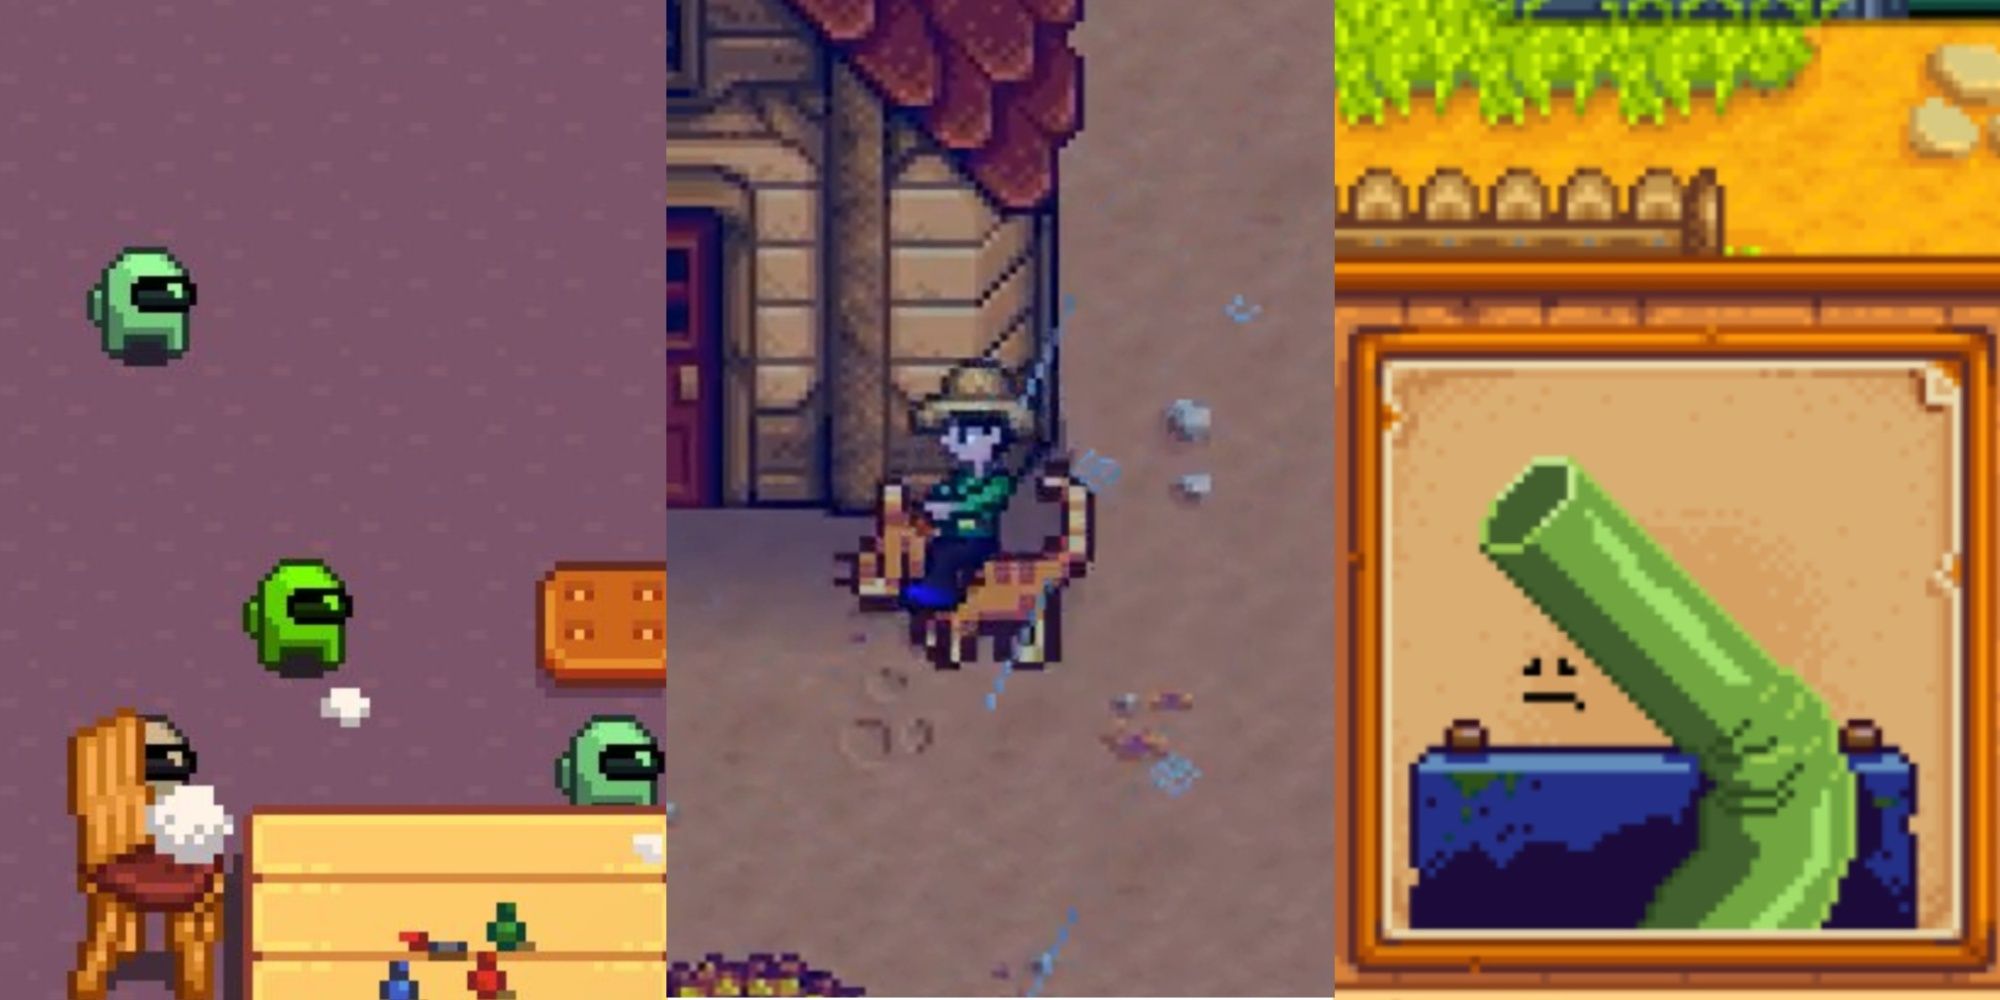 Featured Image, Stardew Valley, Among Us Crewmates Junimo Mod featuring the junimos restoring the craftroom, Horse Cat Mod featuring the farmer on the horsecat, Strawdew Valley mod featuring the George Straw